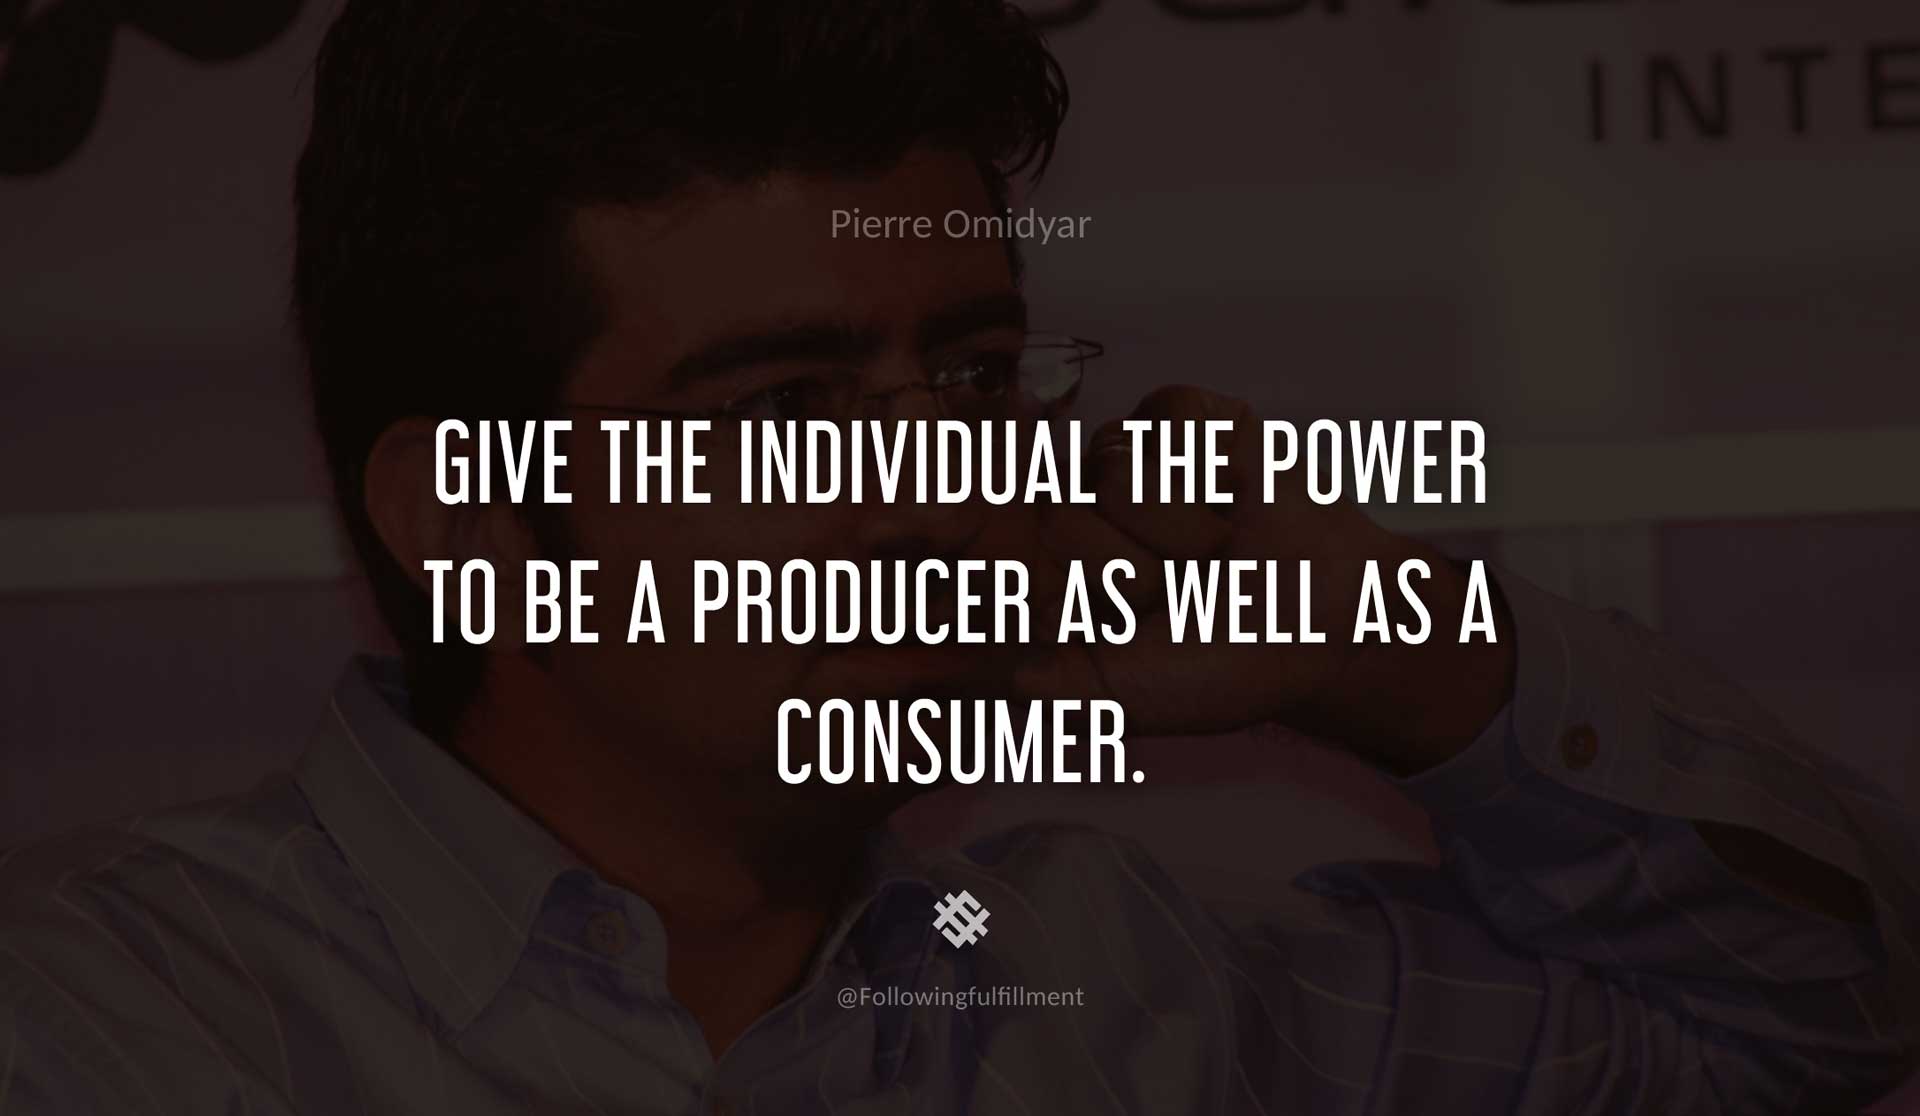 Give-the-individual-the-power-to-be-a-producer-as-well-as-a-consumer.-PIERRE-OMIDYAR-Quote.jpg